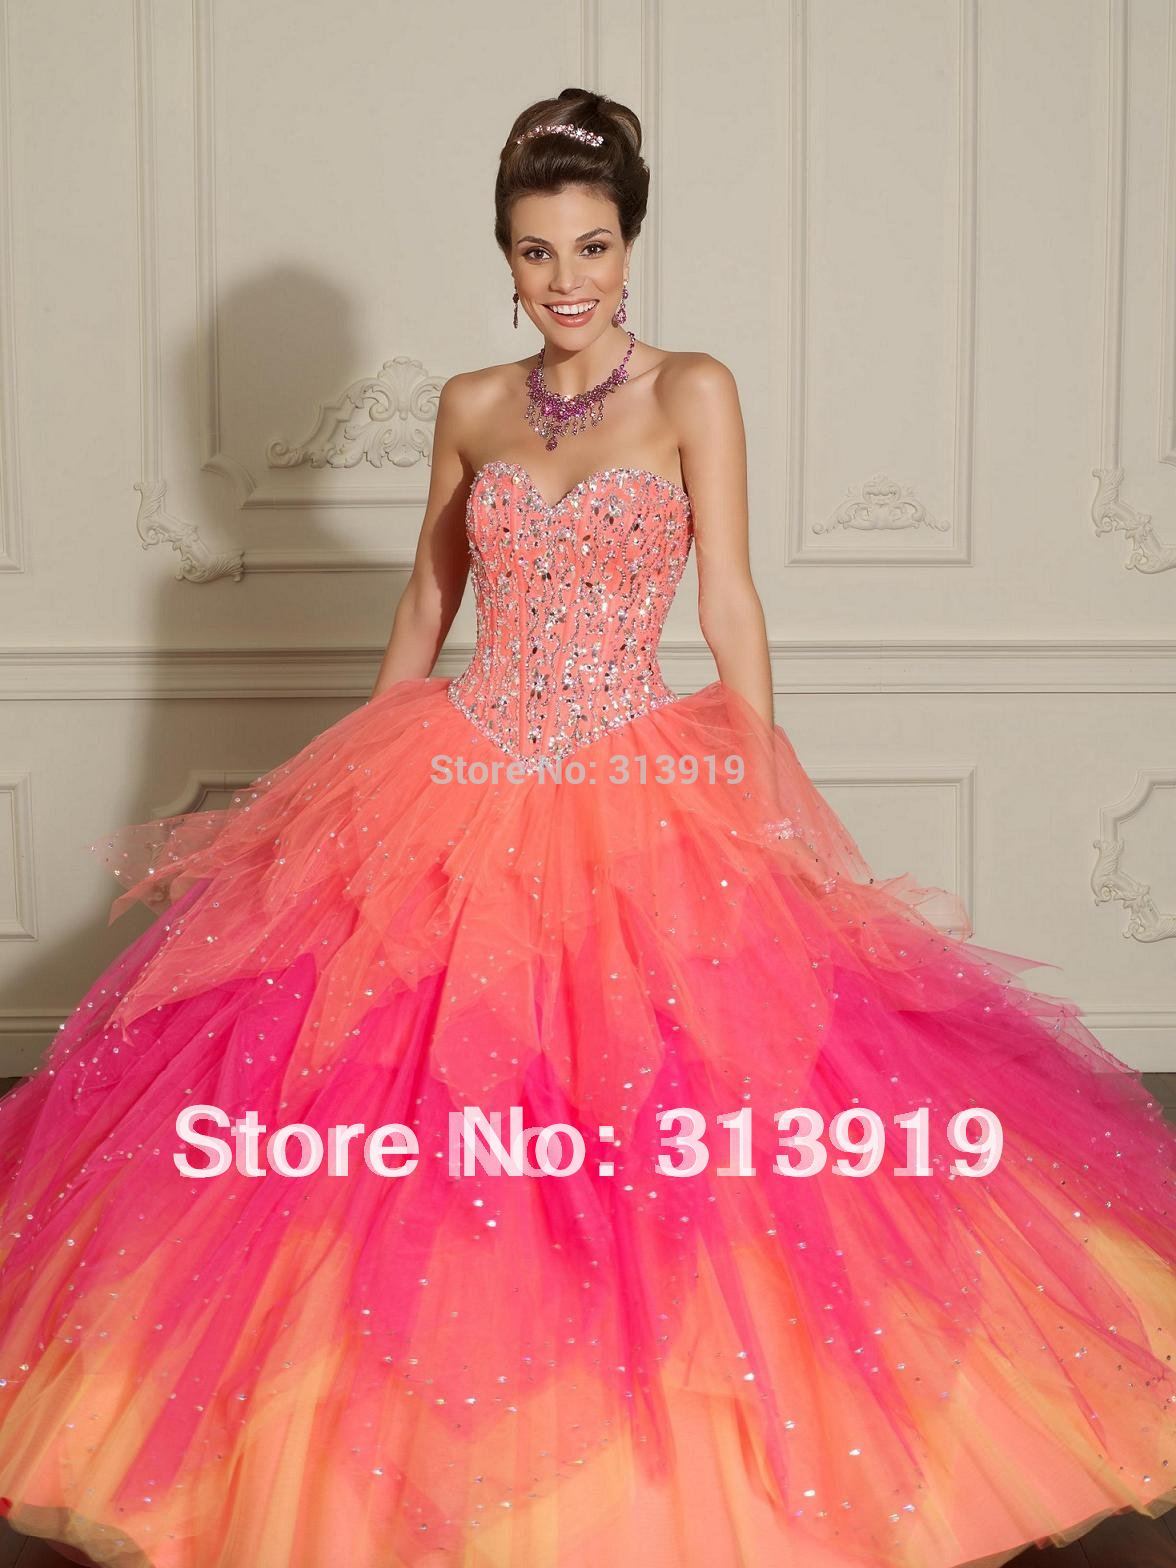 free-shipping-puffy-lace-up-ball-gown-rainbow-prom-dress-2012.jpg